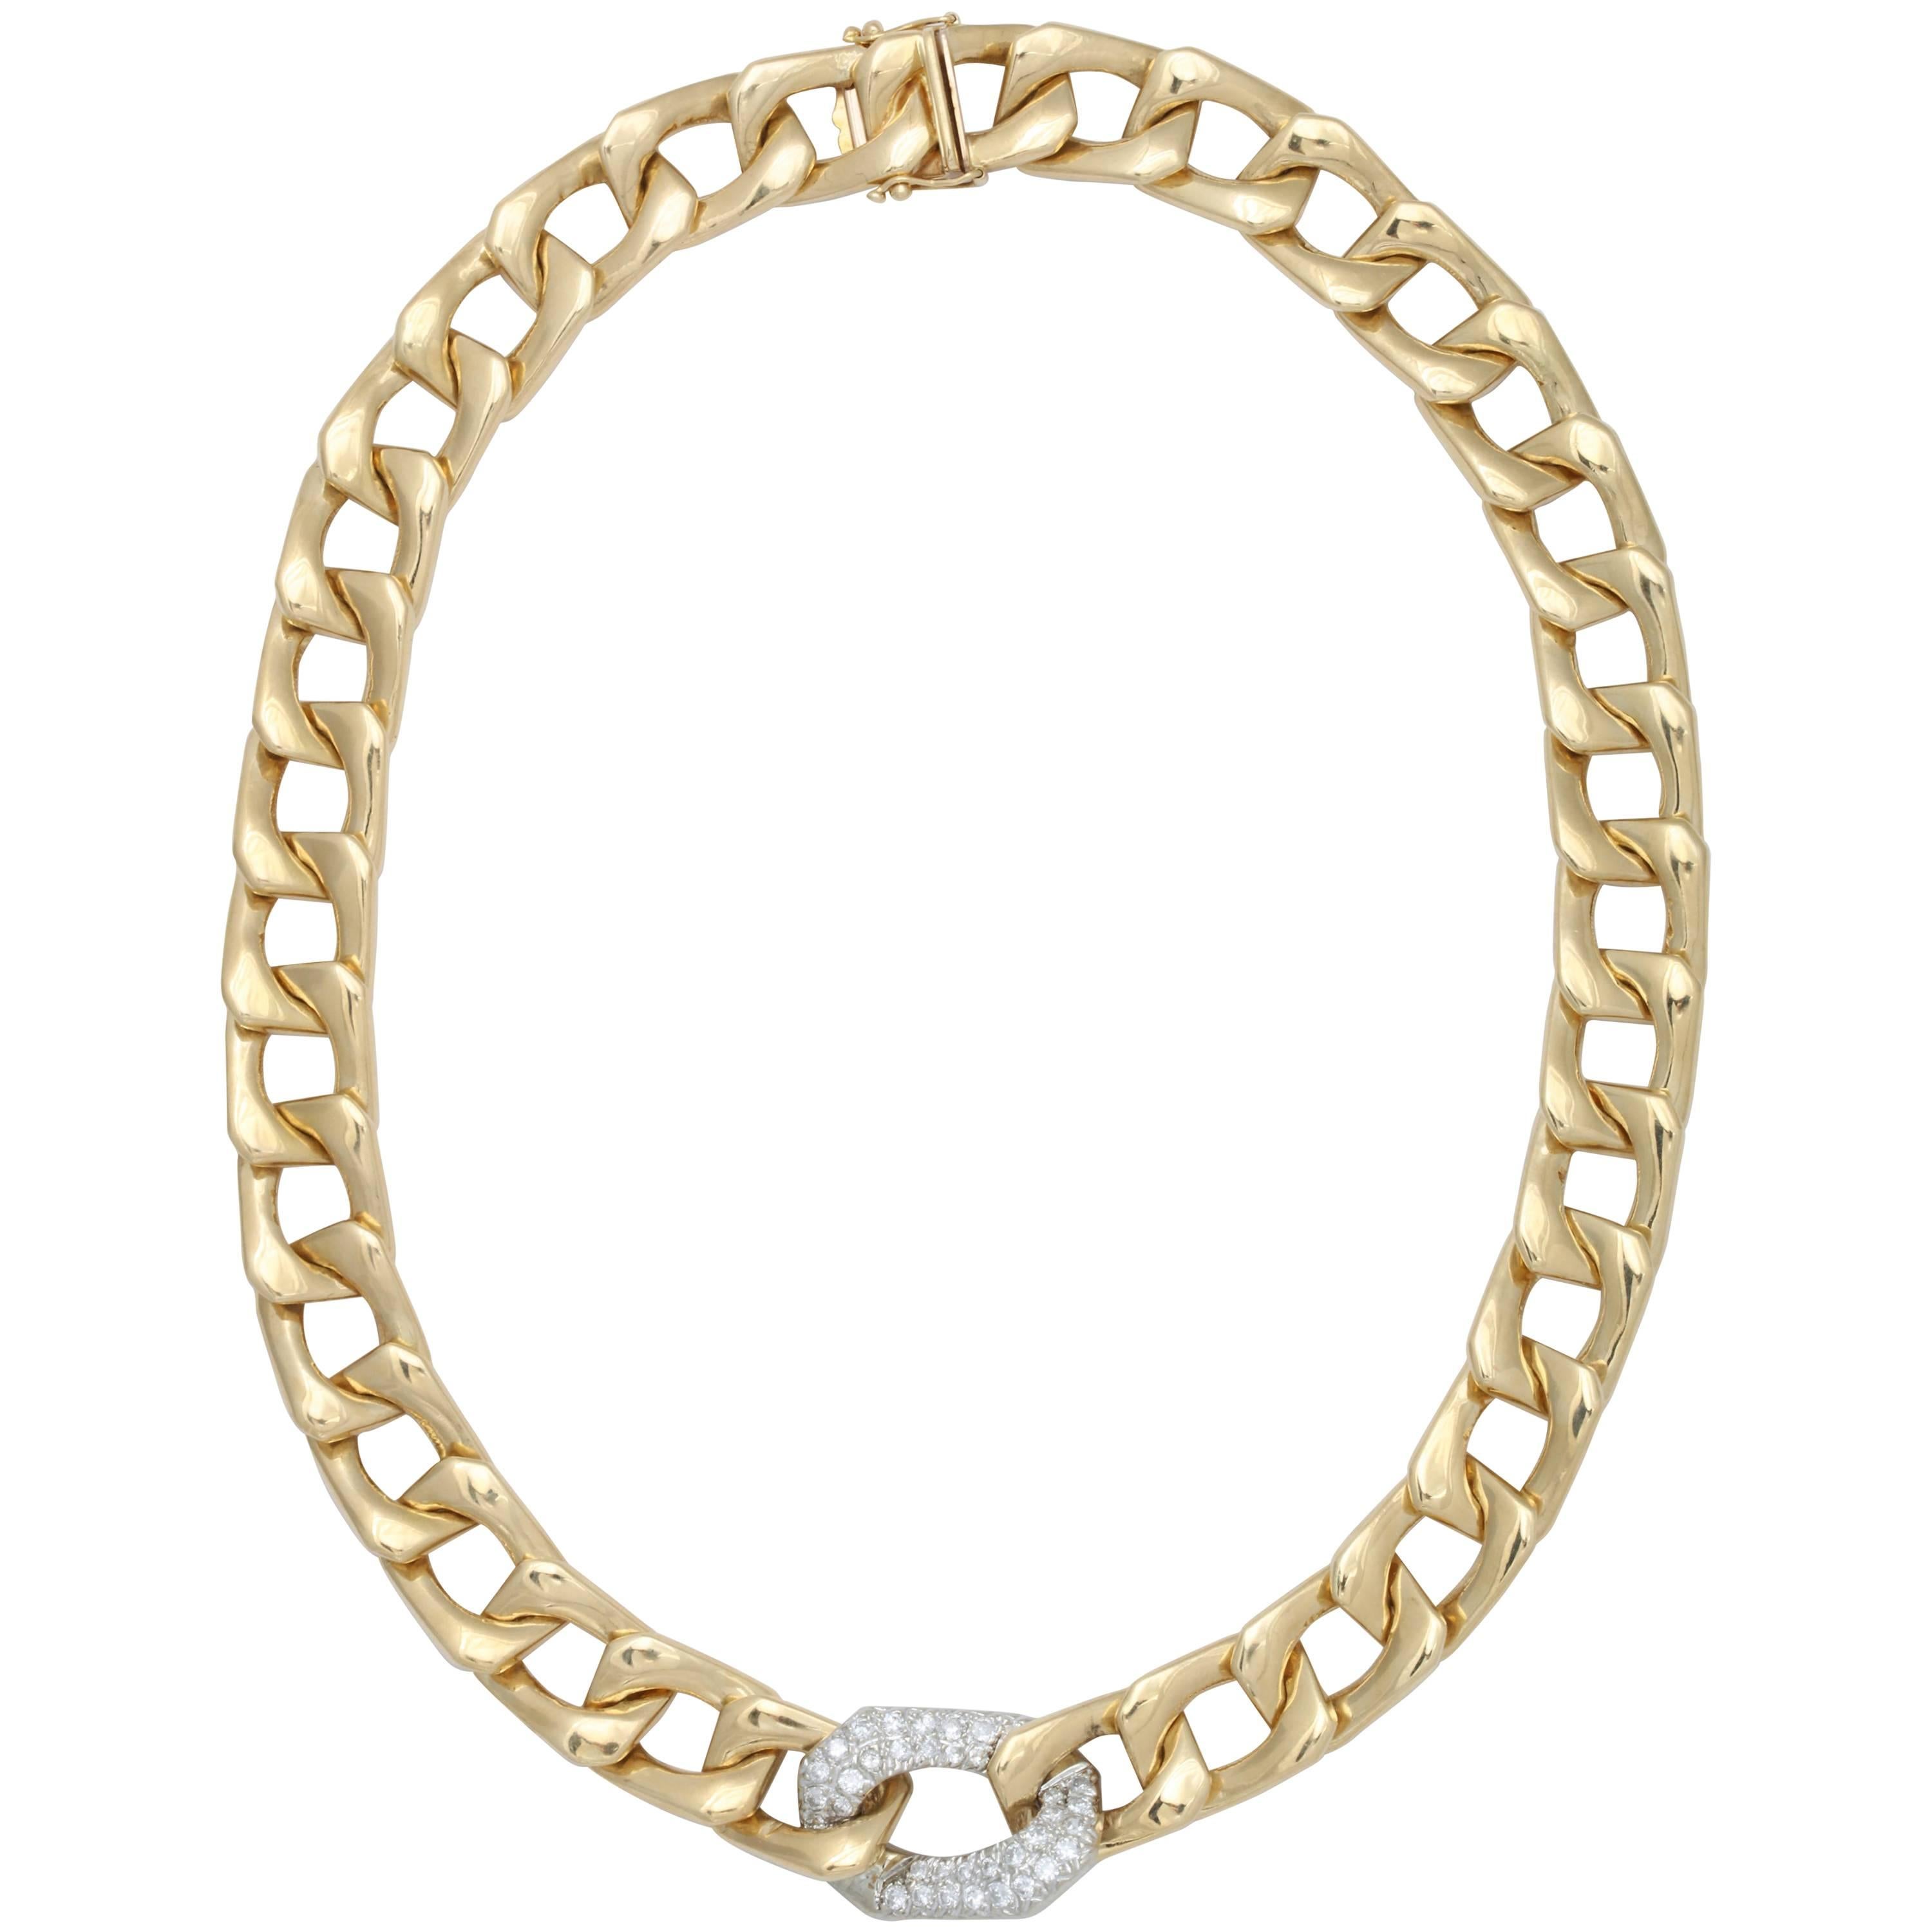 Gold Flat Curb Chain with Diamond Pave Centre Link